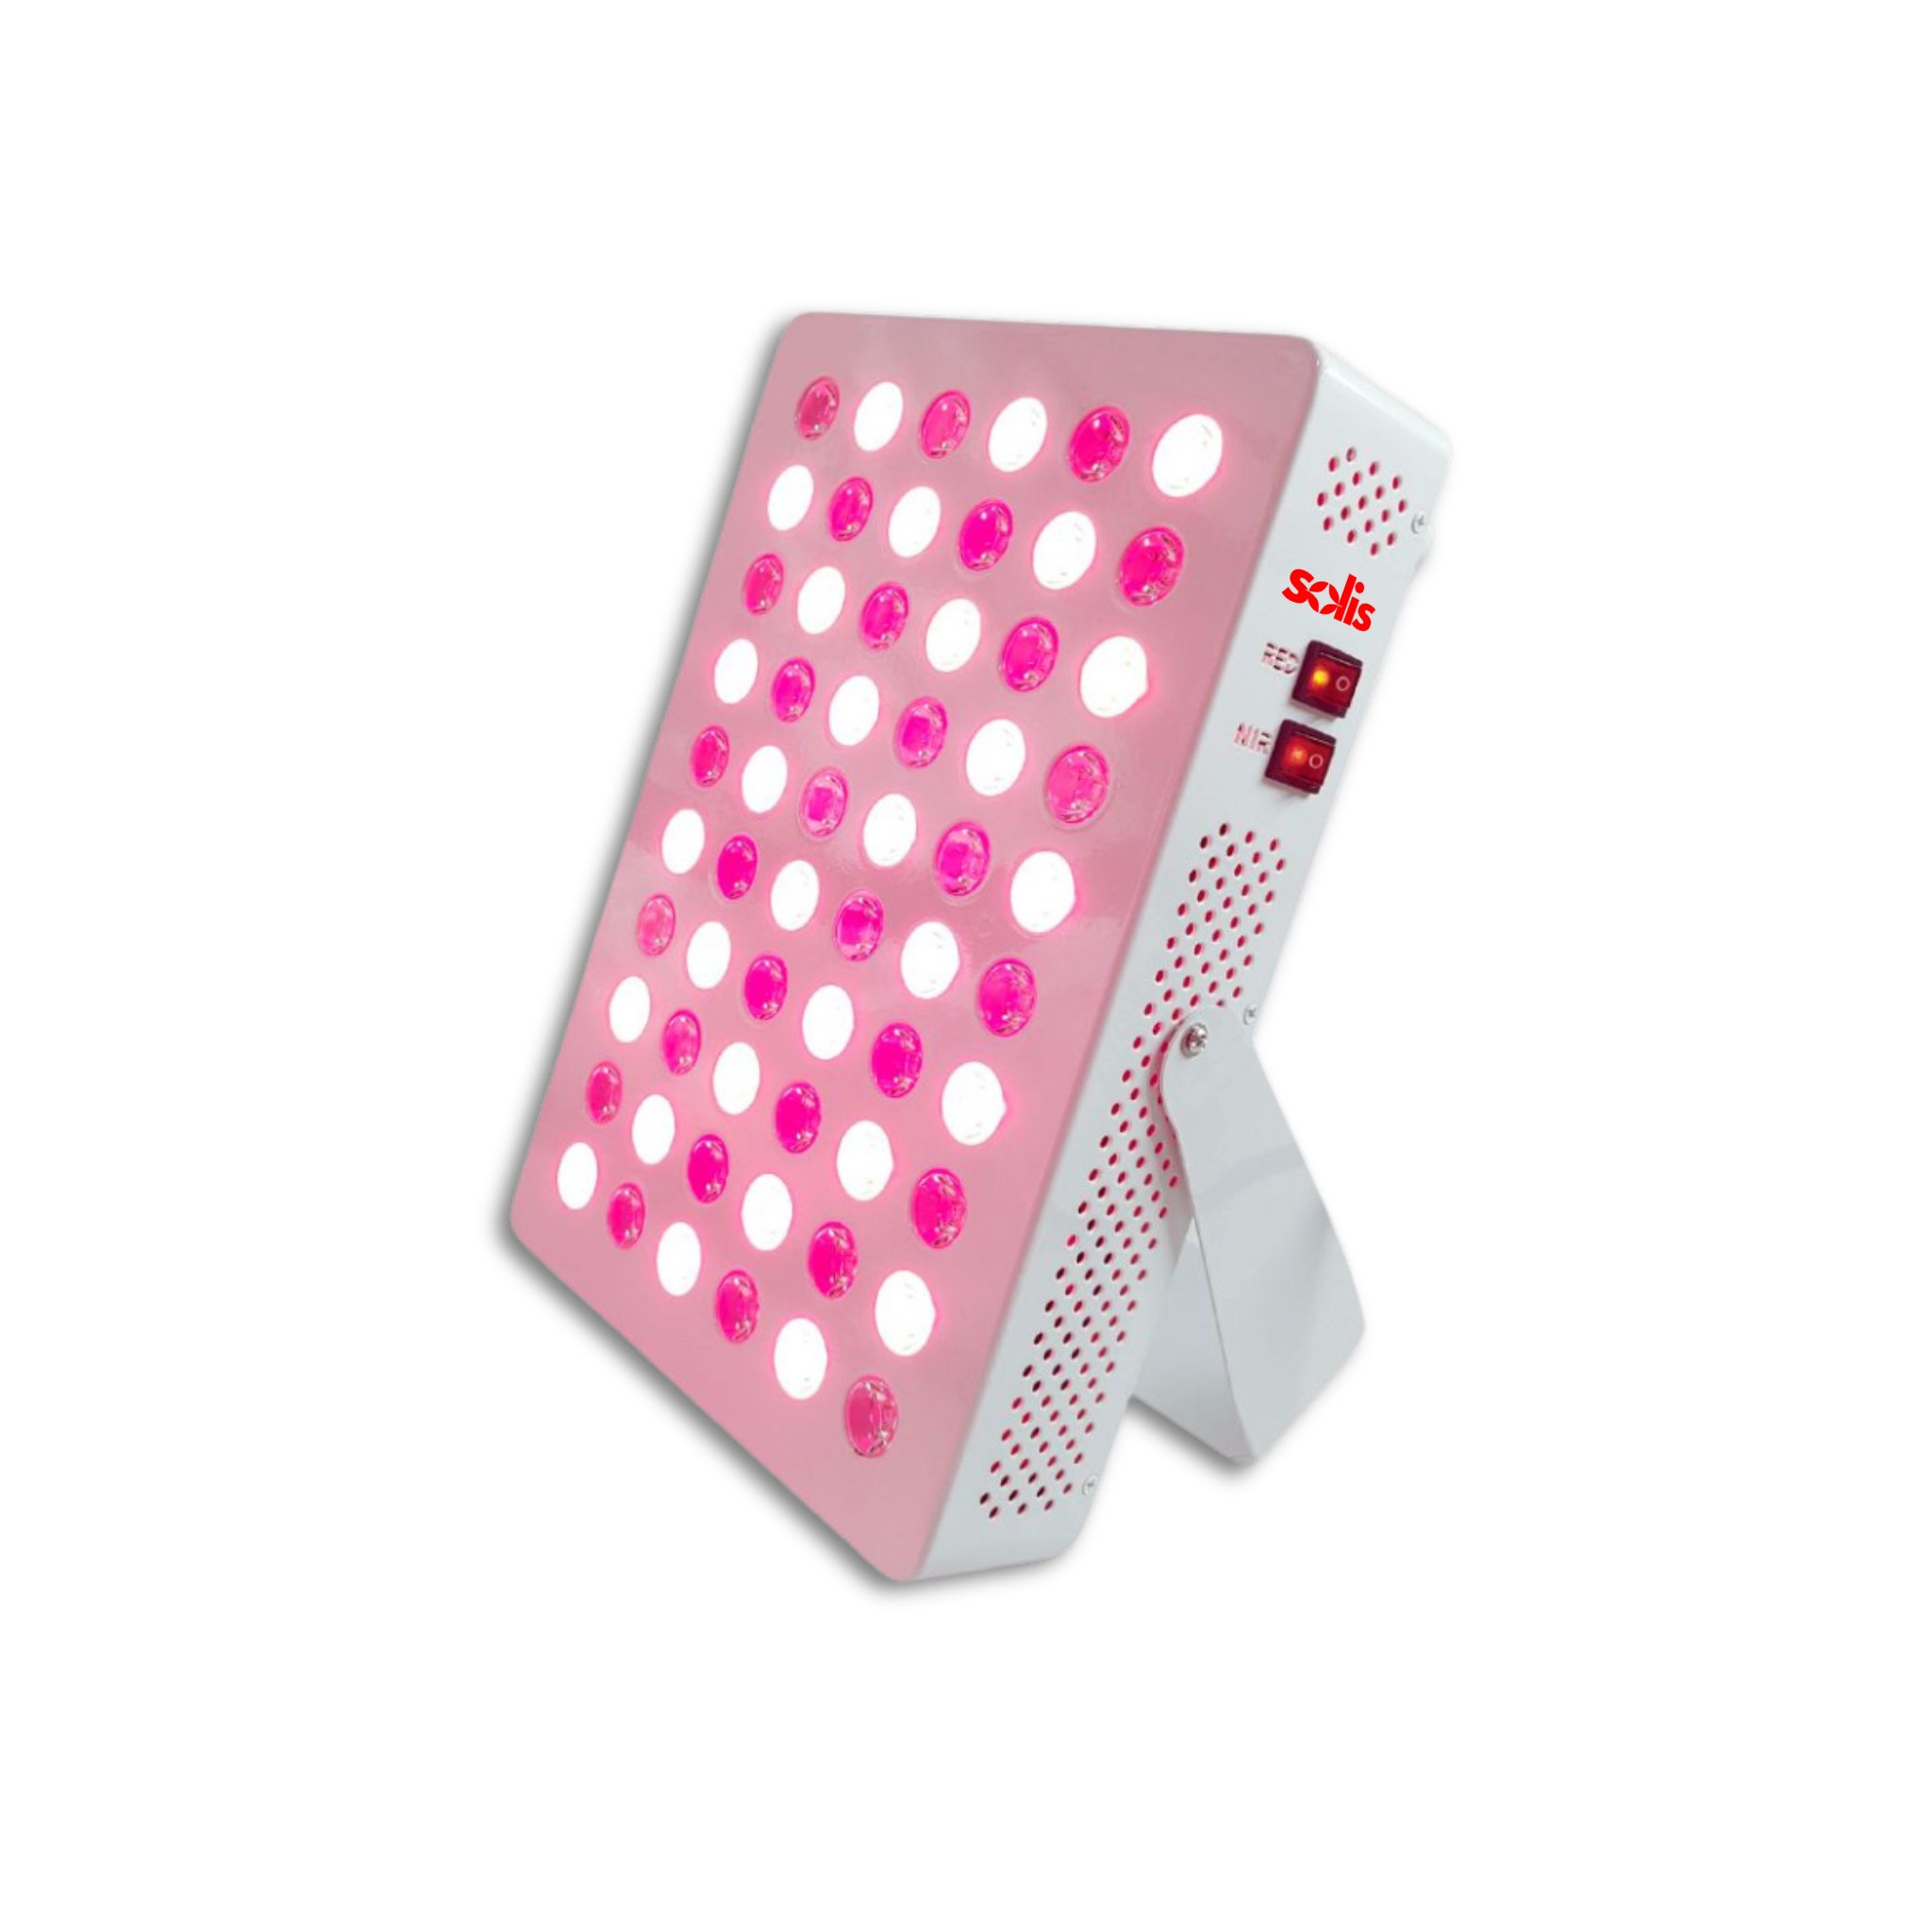 A pink LED light therapy device on a black background.